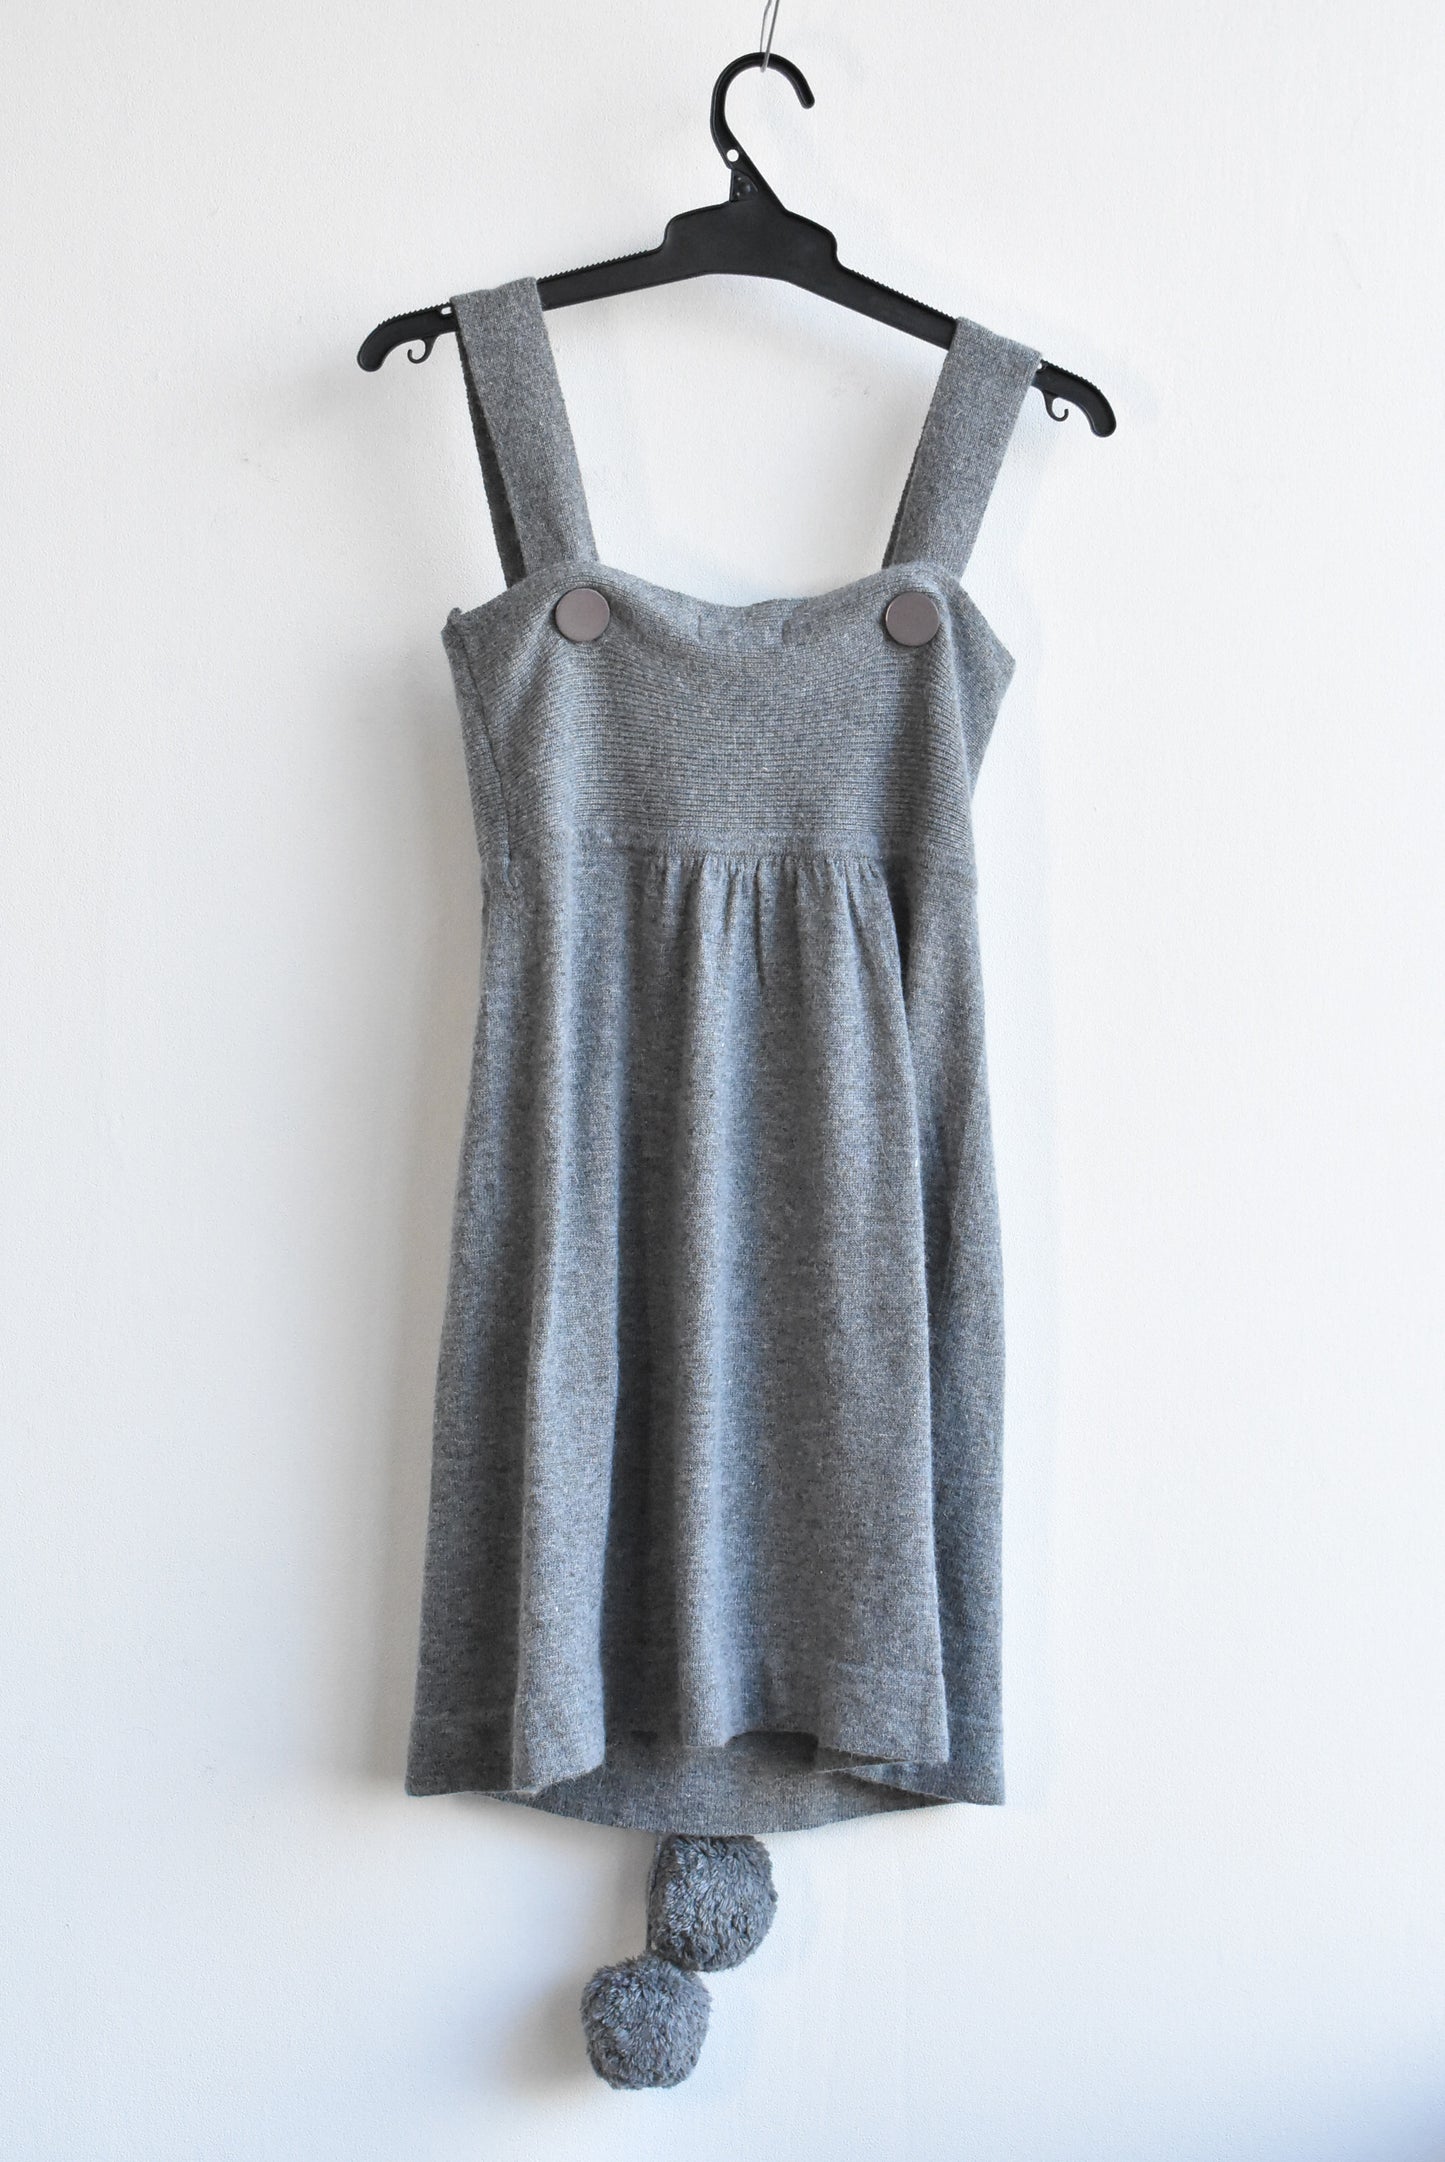 Face Off grey wool blend pinafore, XS